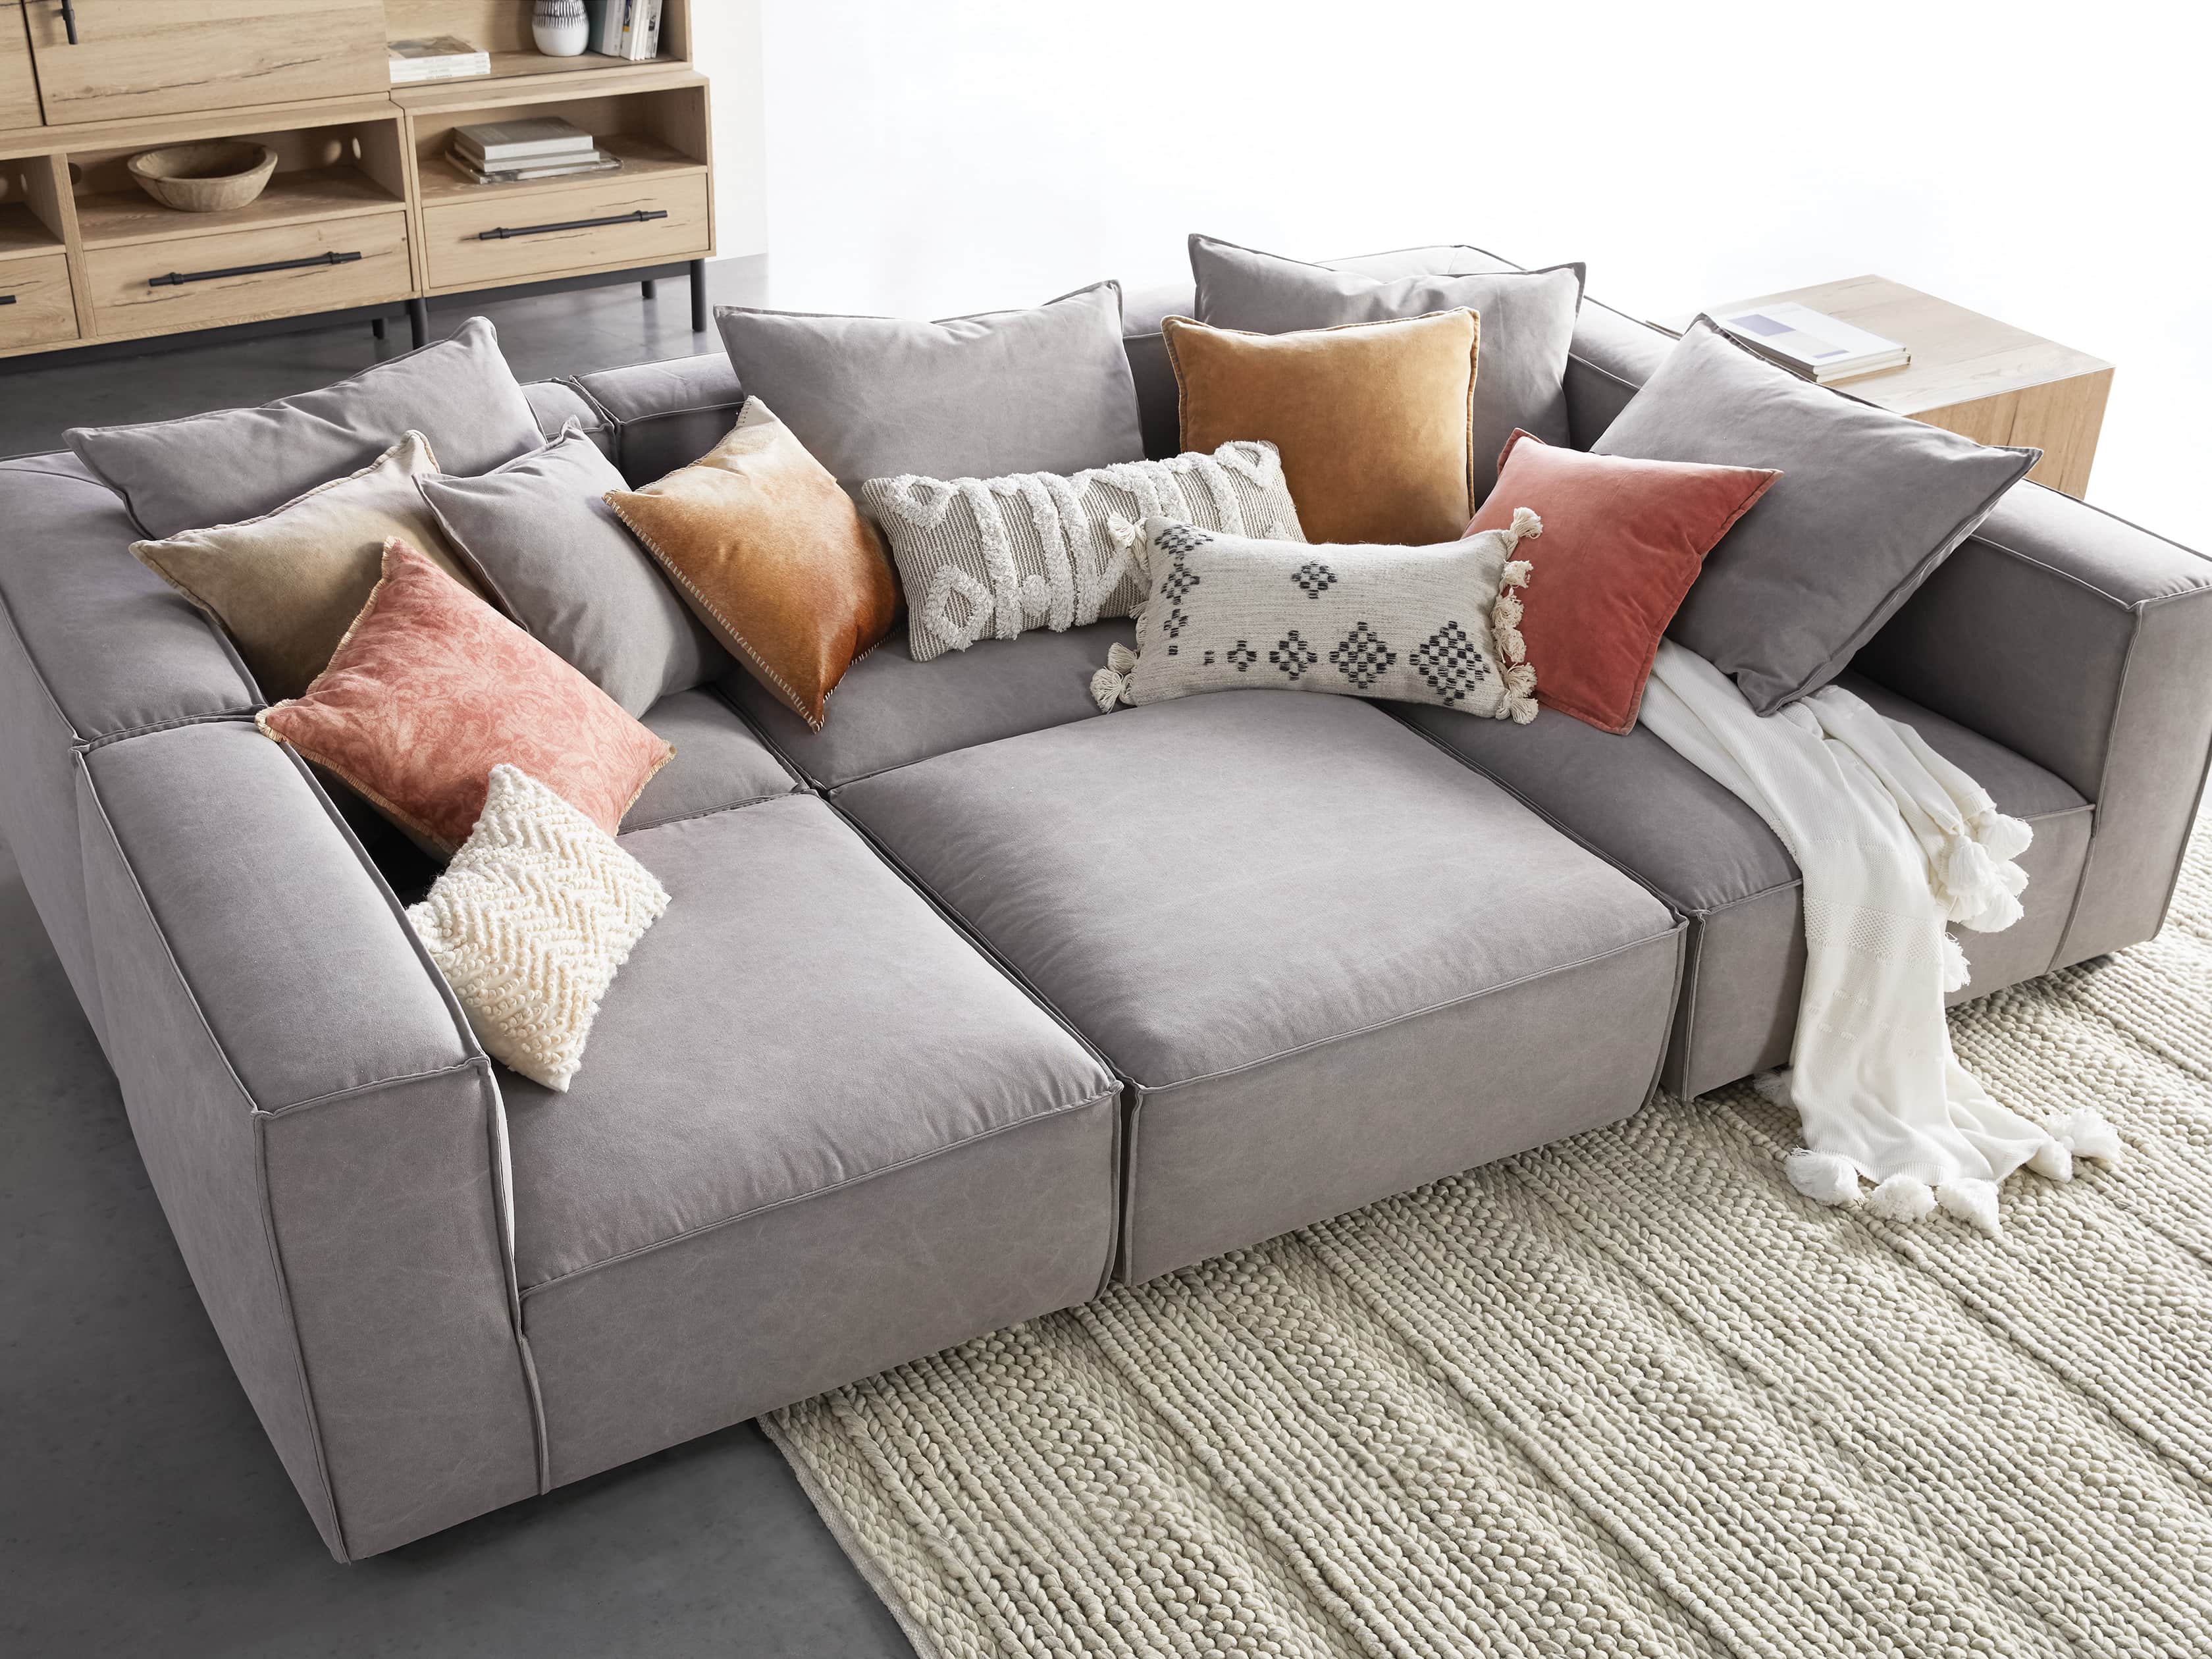 Couches Leather Sectional Sofas, Pit Group Sofa